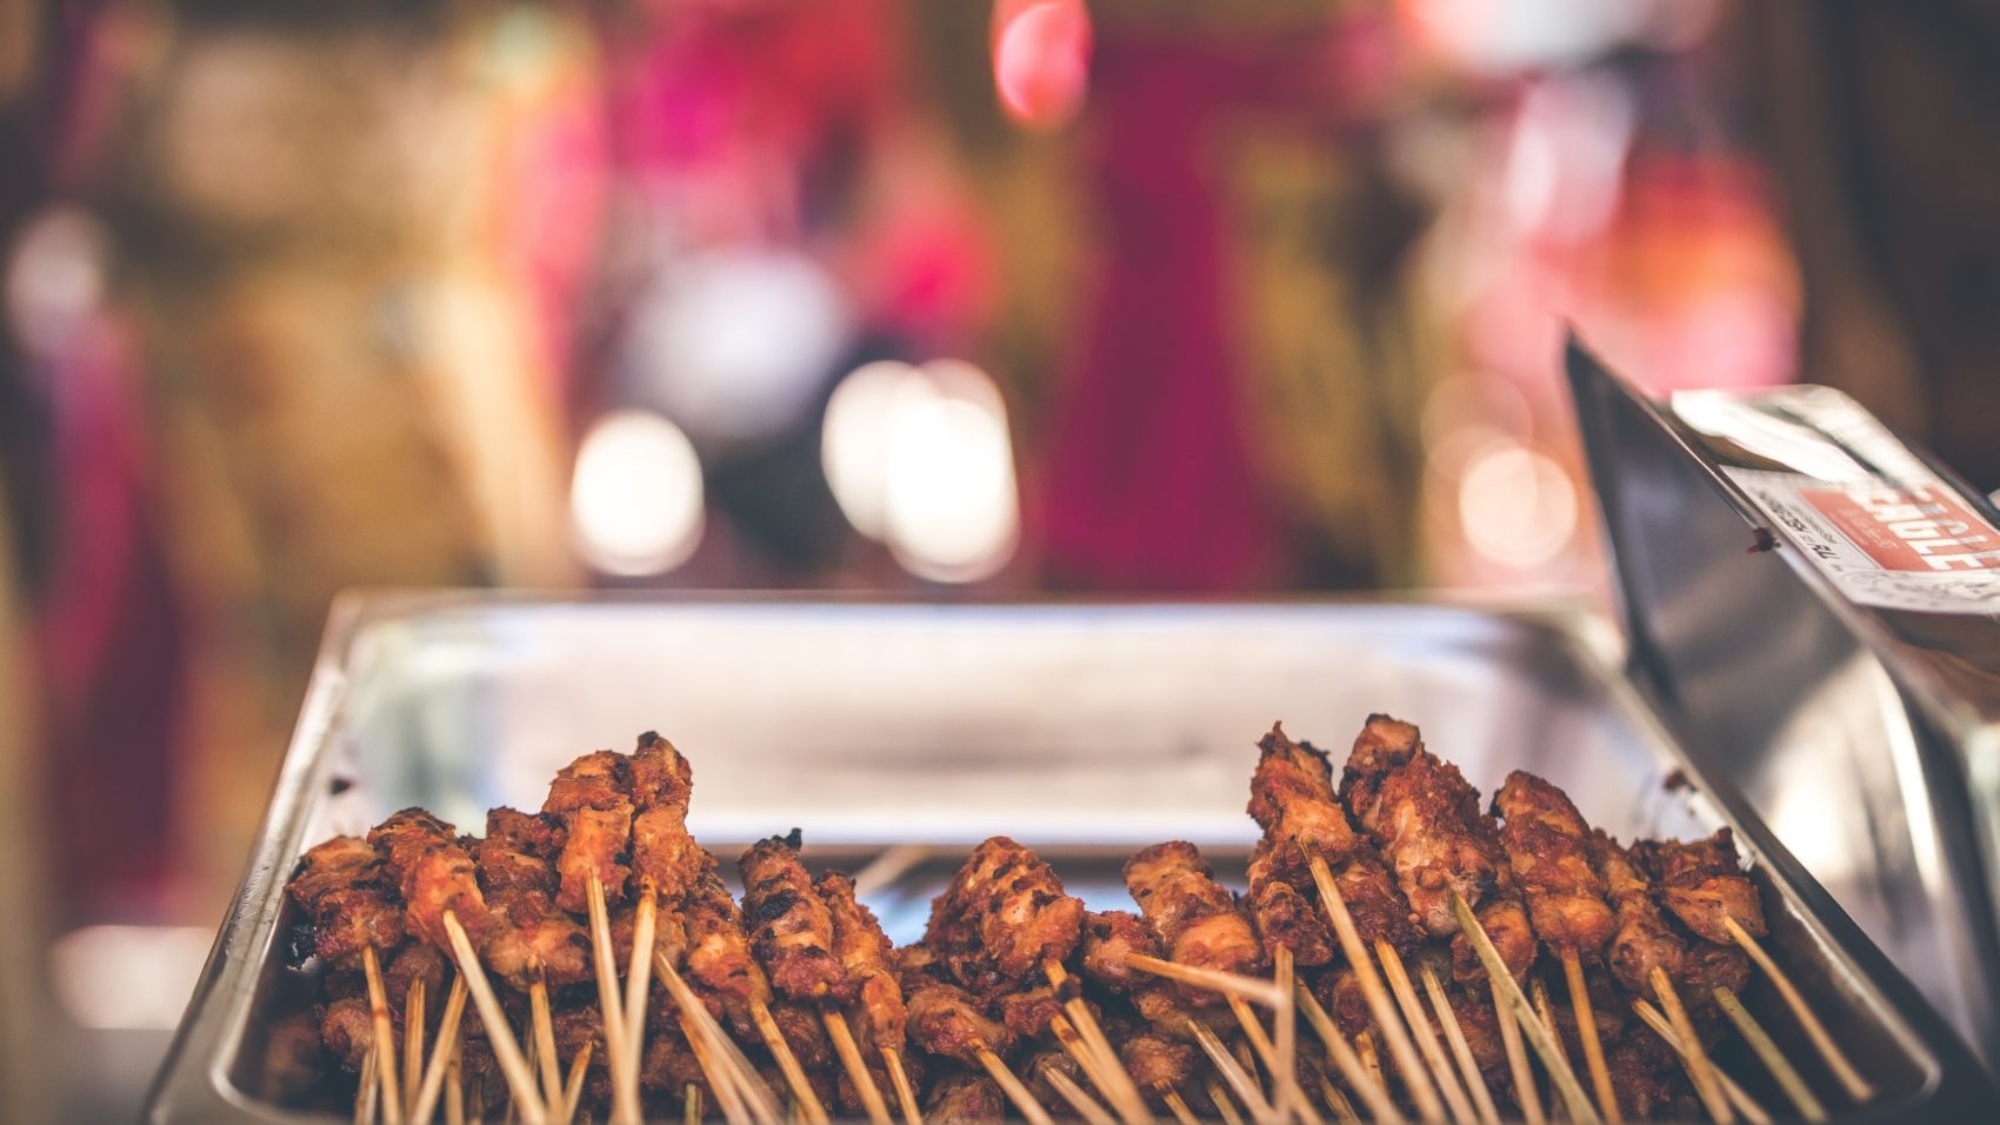 barbecue-blurred-background-delicious-1116596